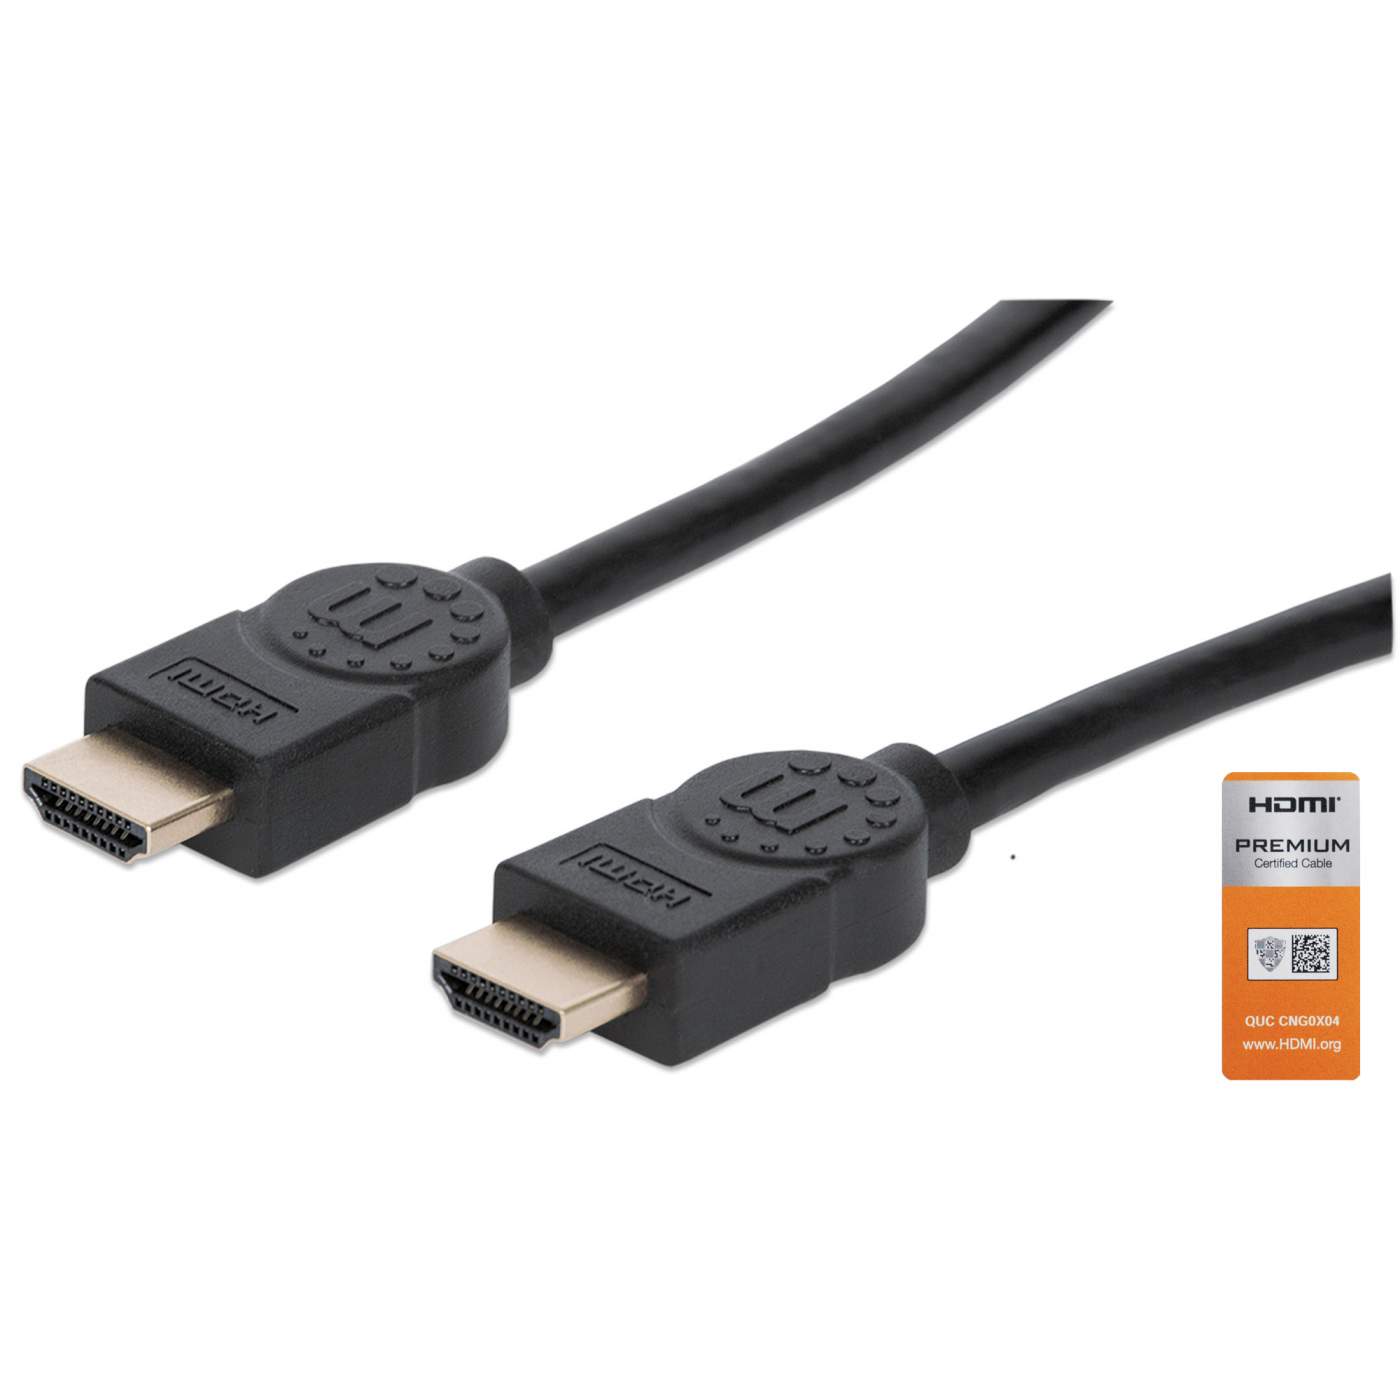 10ft (3m) High Speed HDMI® Cable with Ethernet - 4K 60Hz